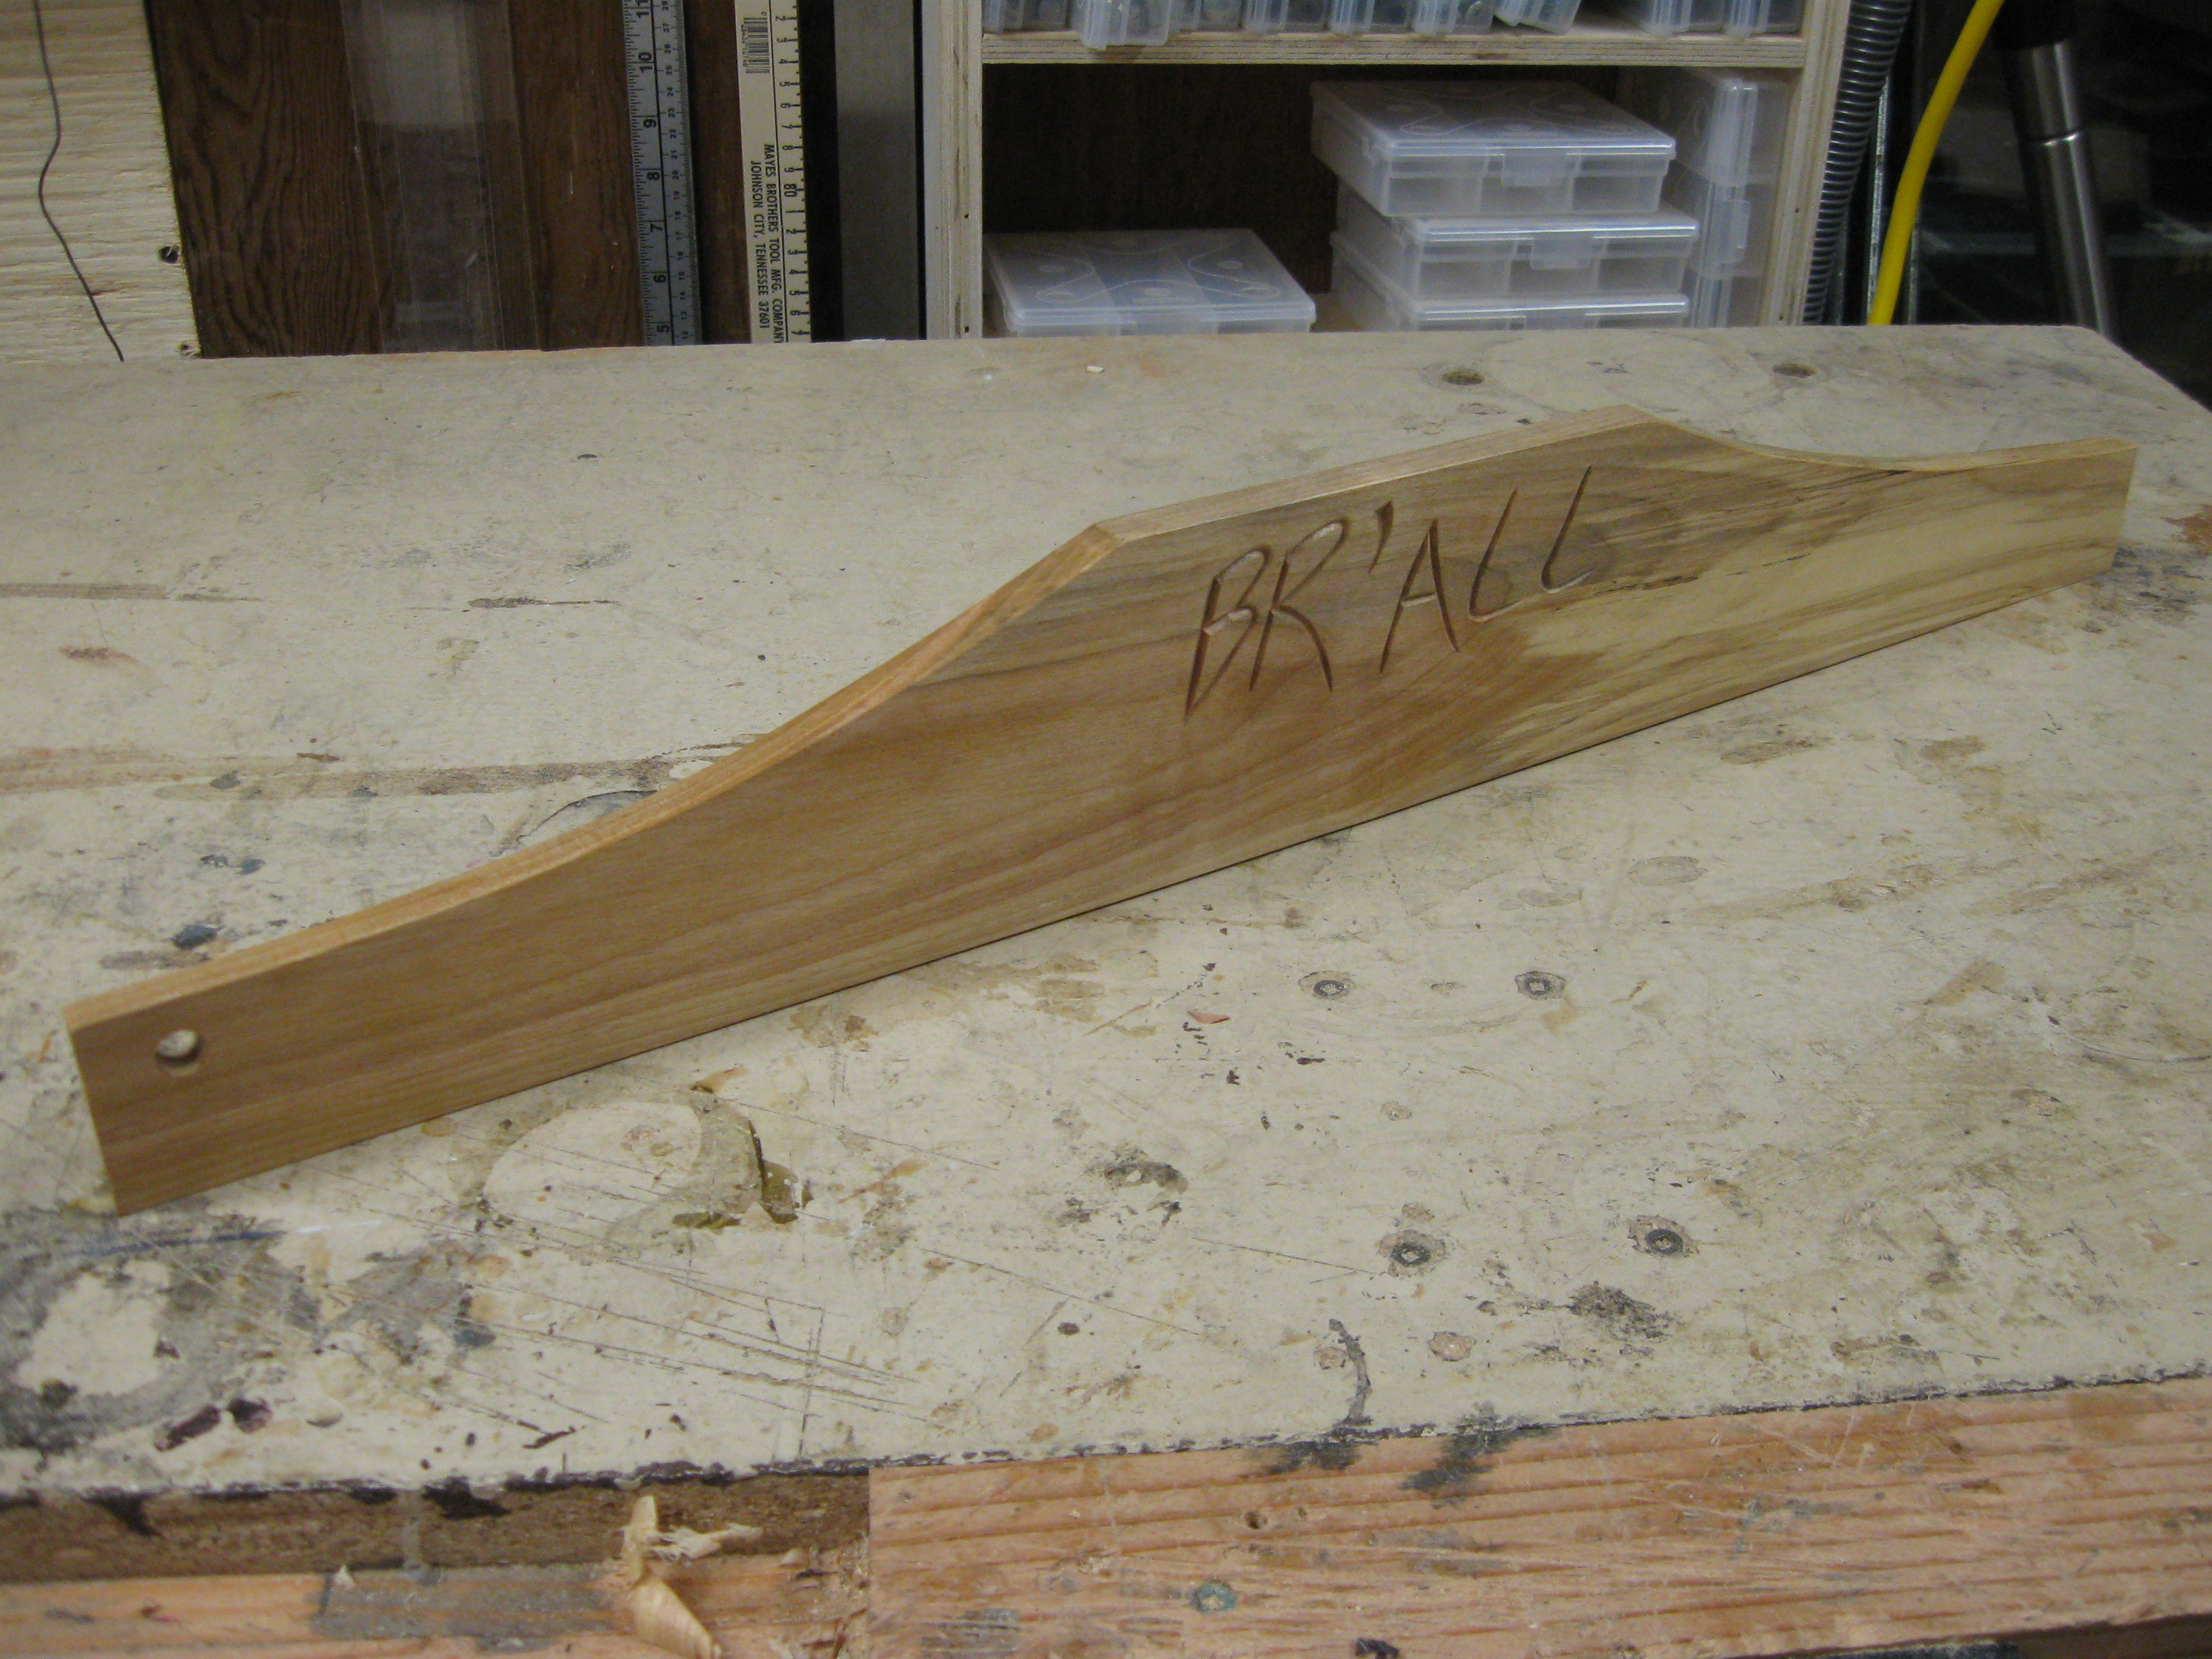 Every Workshop Needs a Br'all  Flair Woodworks